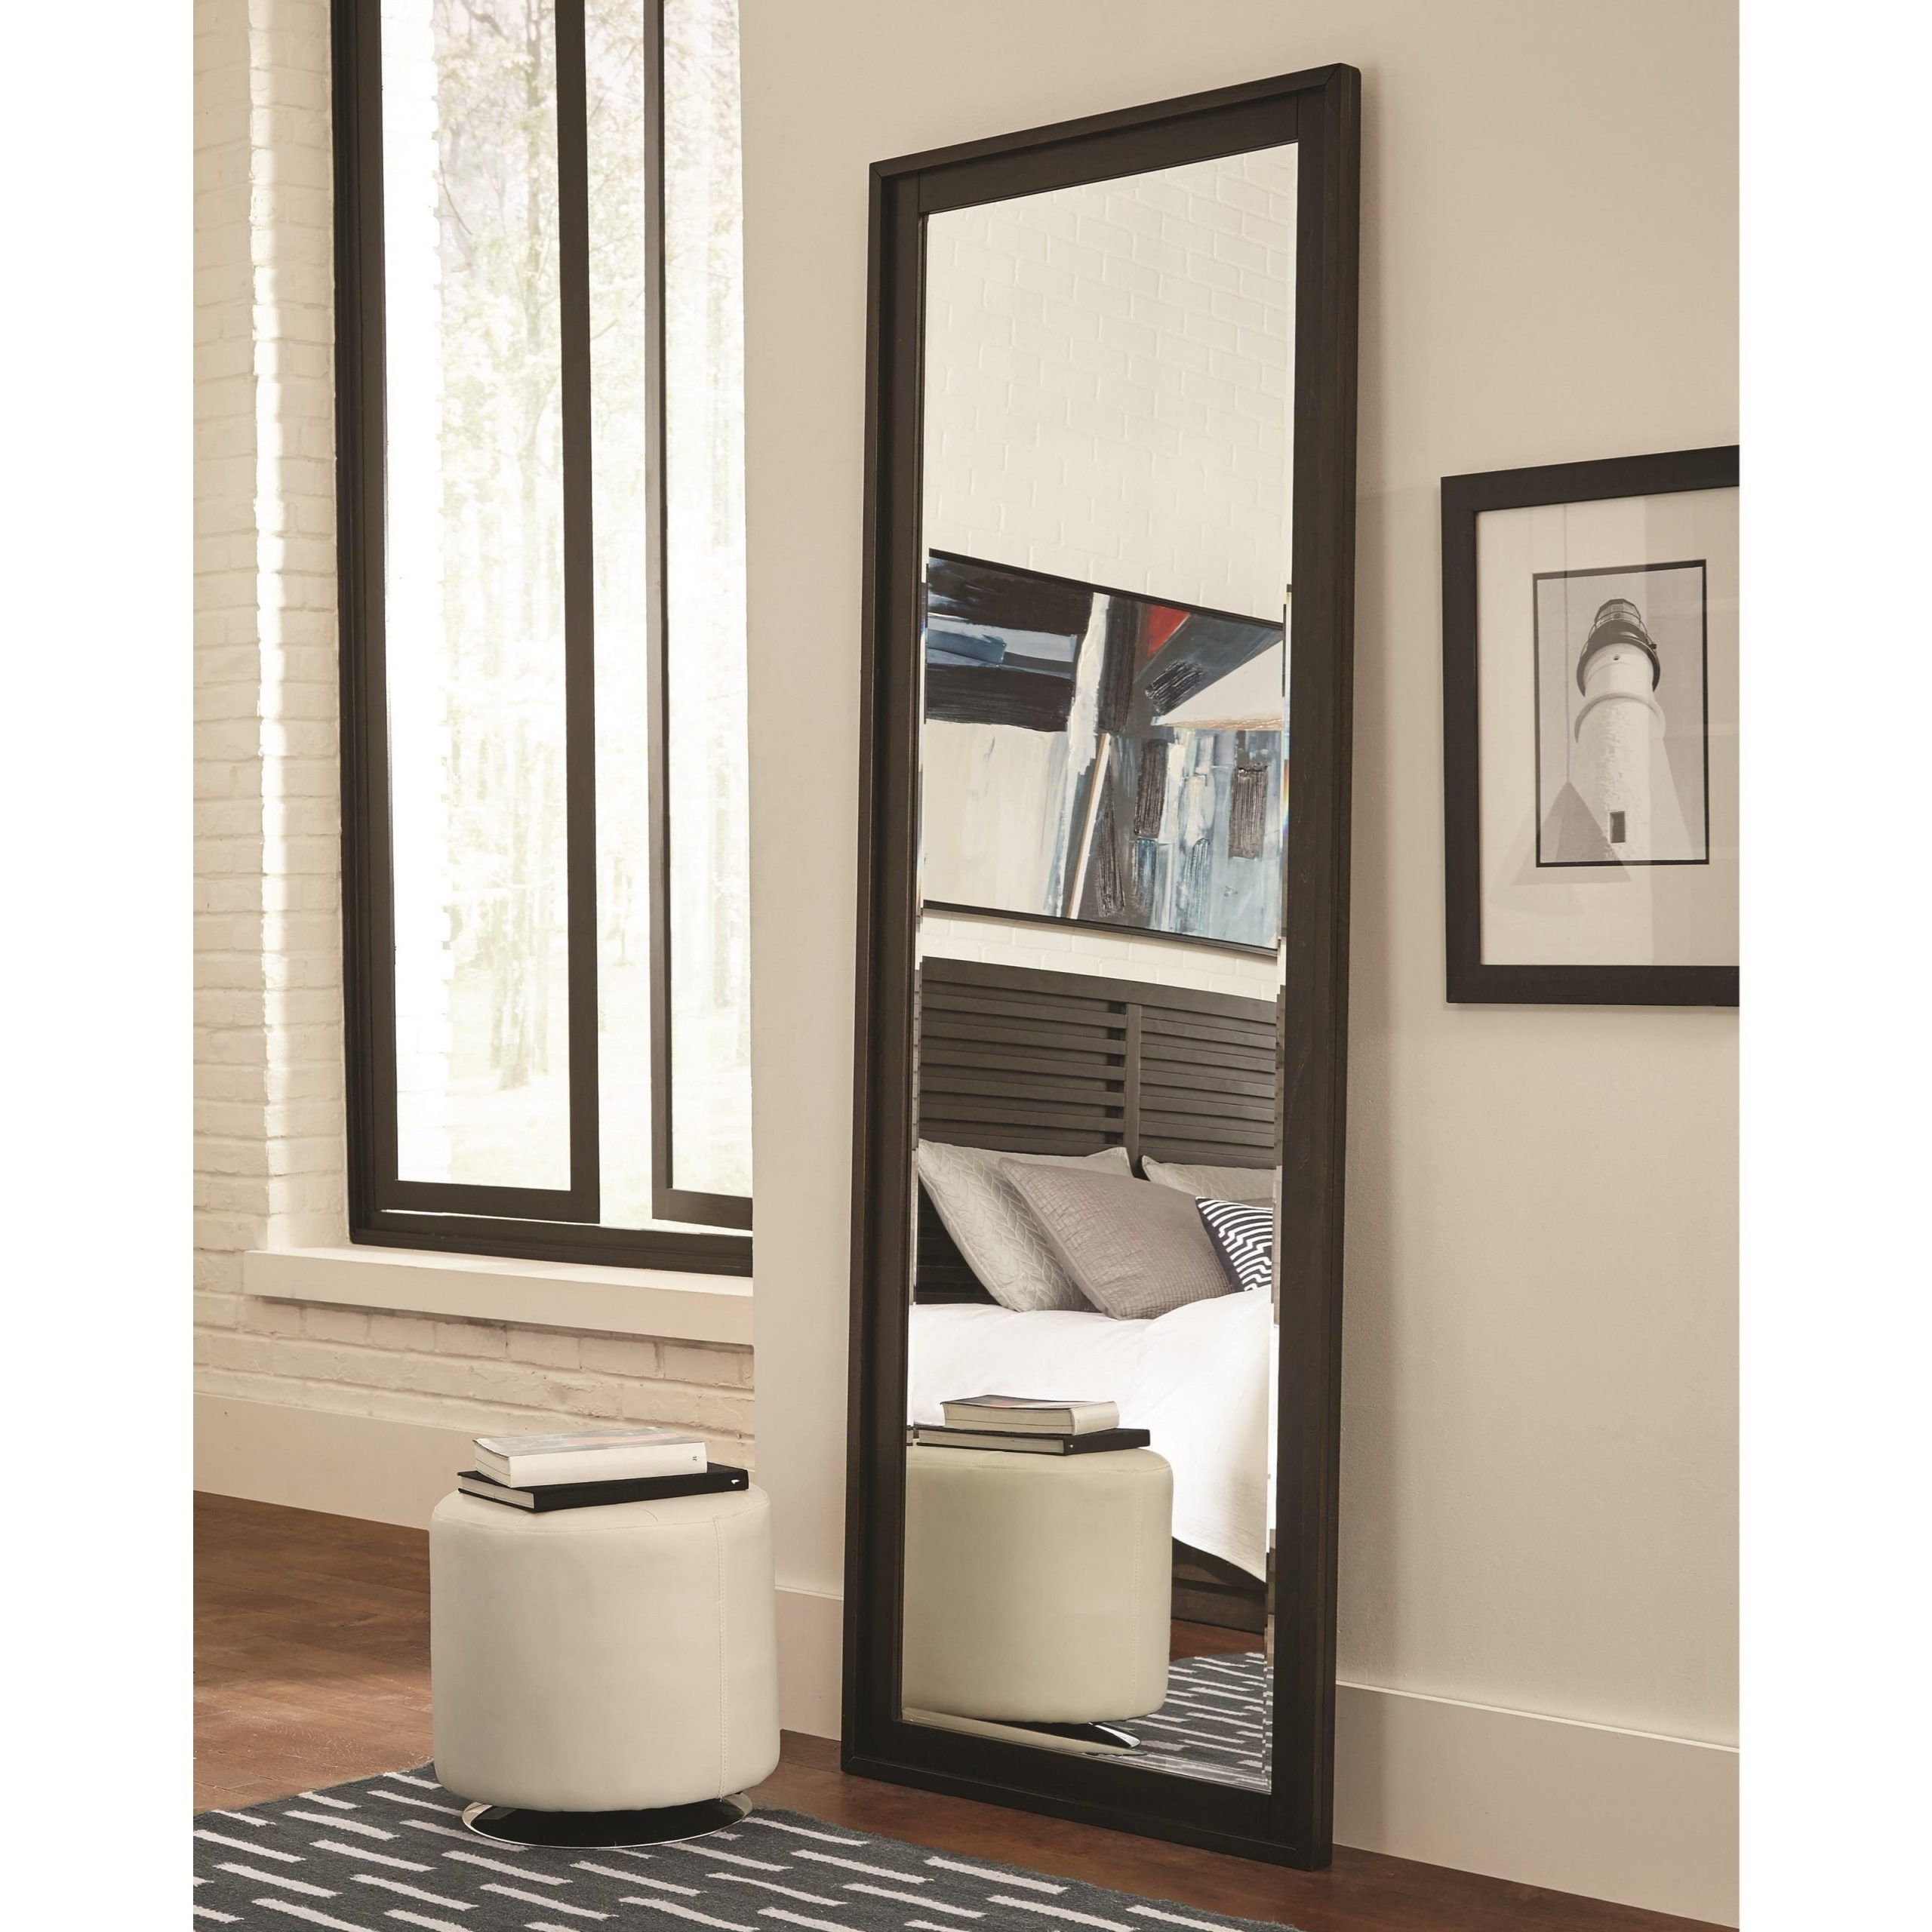 Matheson Full Length Floor Mirror | Quality Furniture At Affordable With Full Length Floor Mirrors (View 2 of 15)